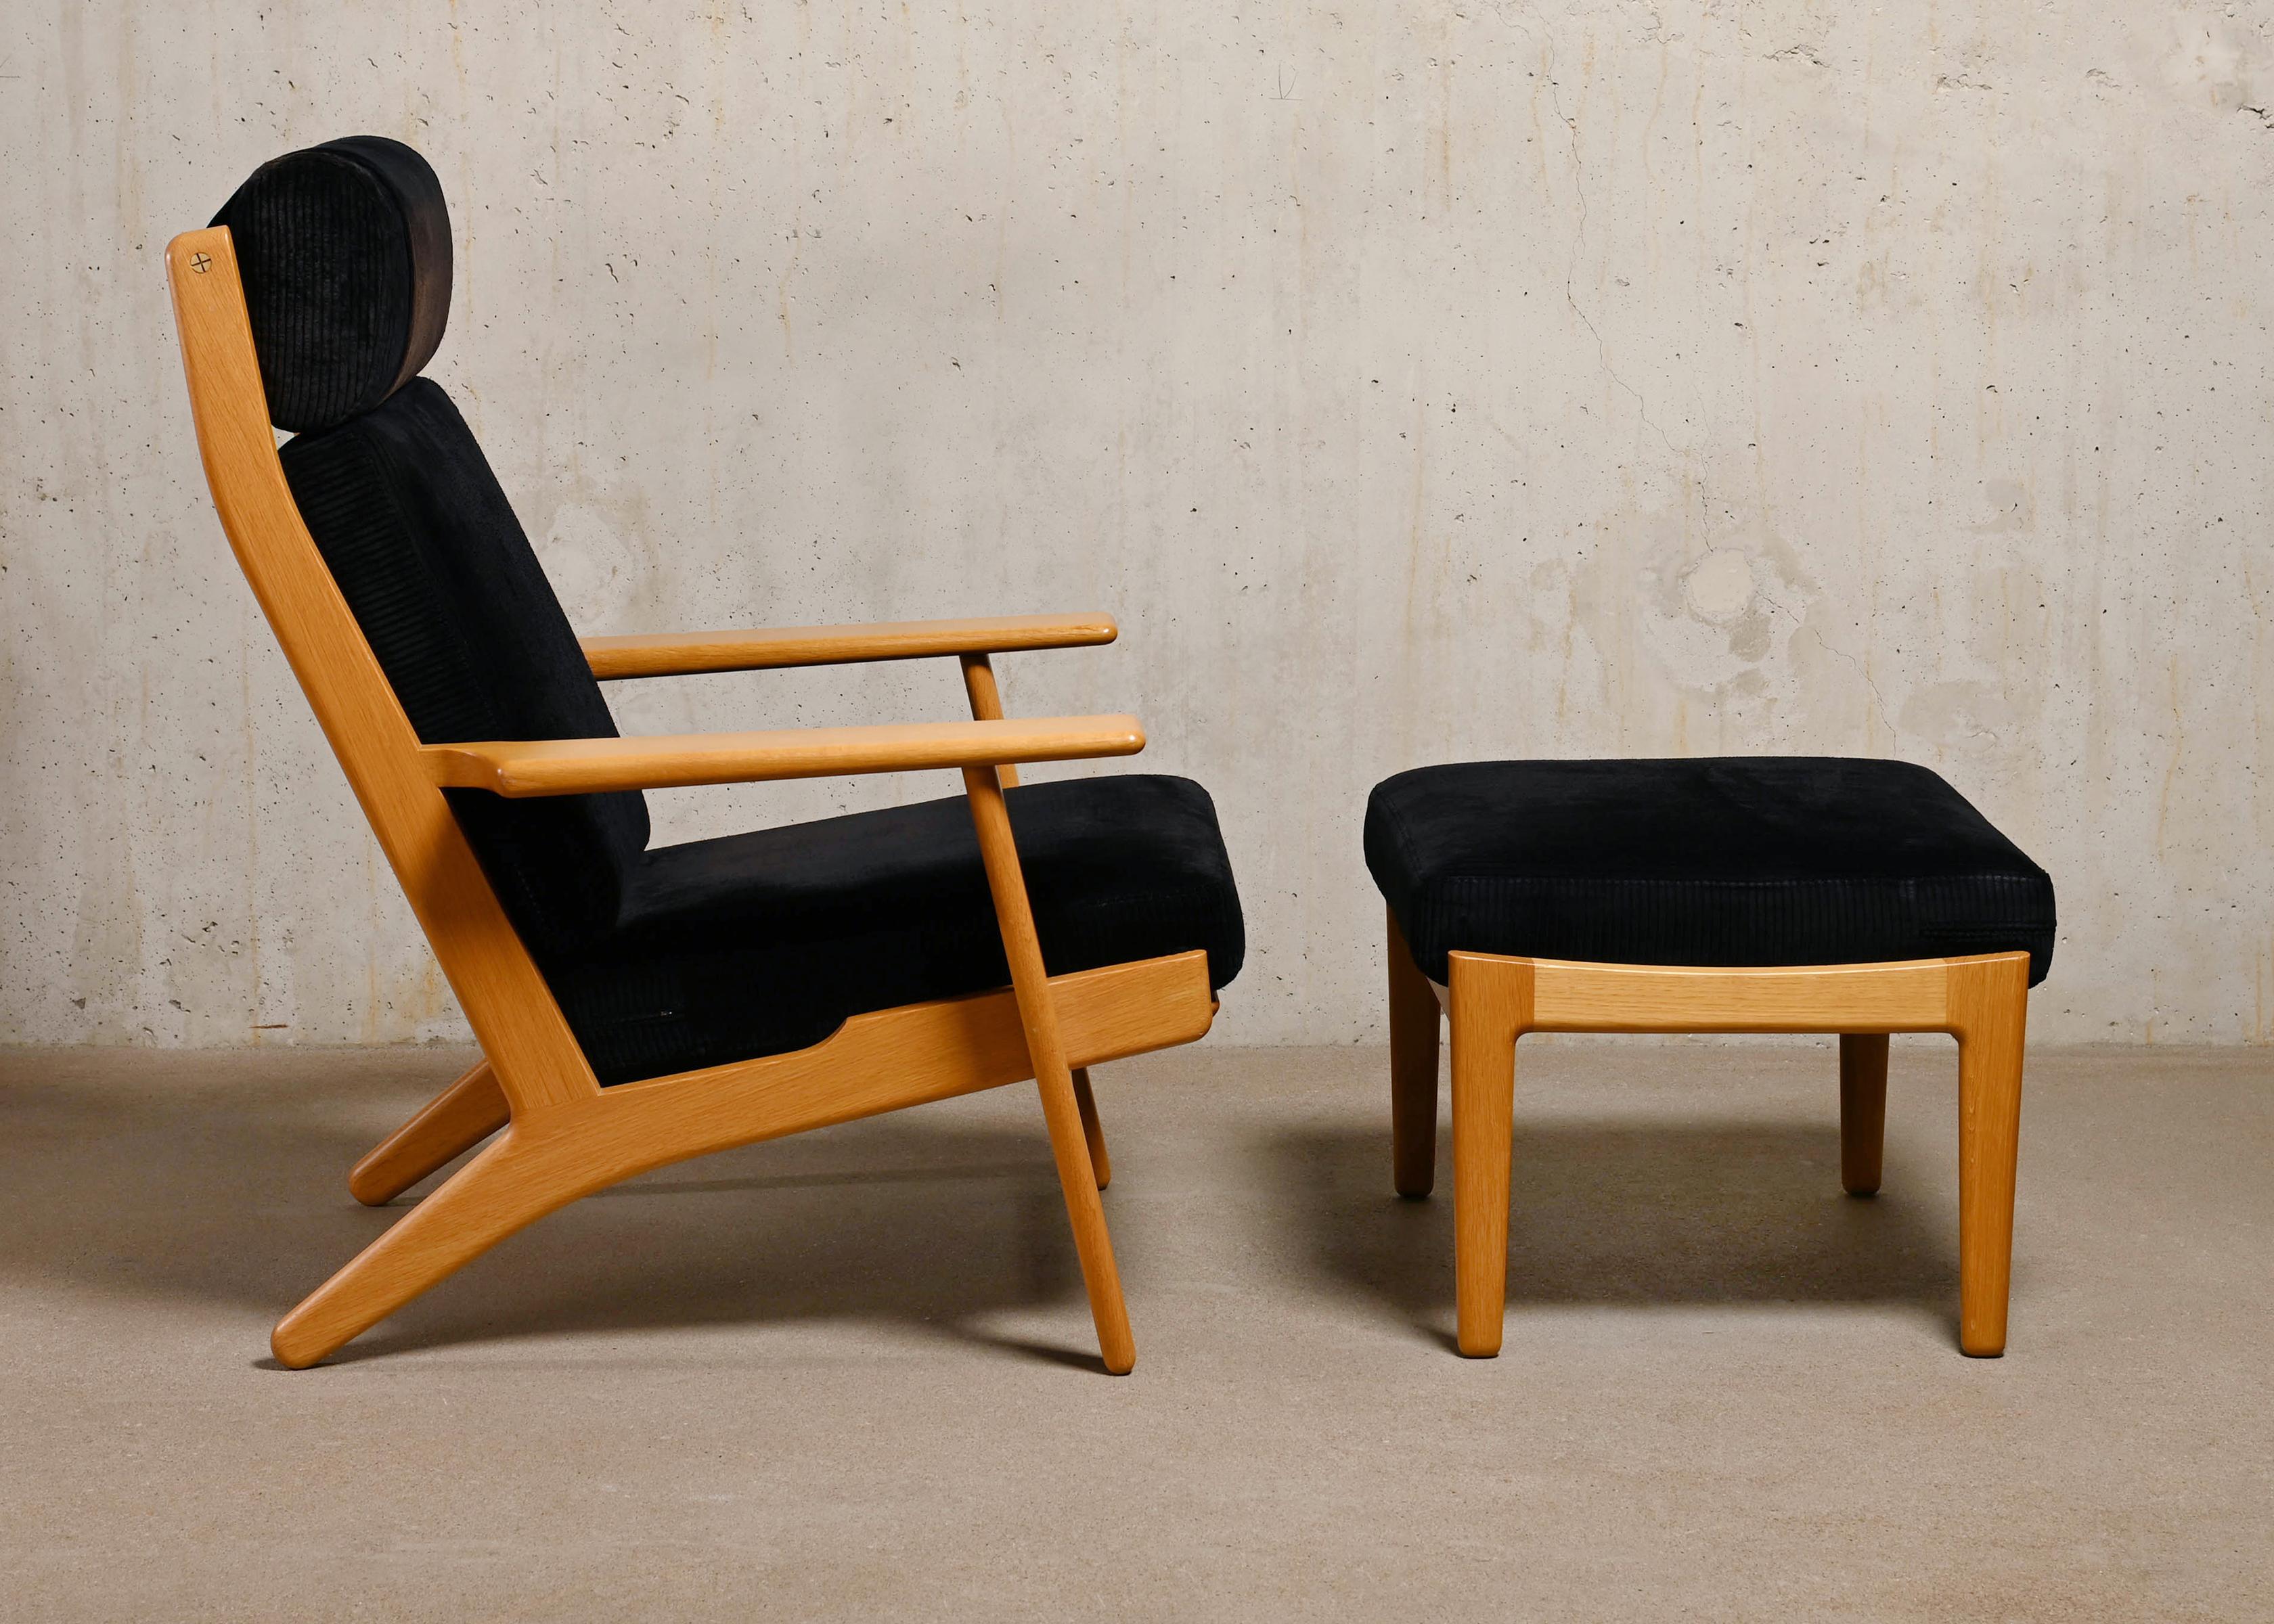 Great example of Hans Hans Wegner model GE290A lounge chair and matching ottoman for GETAMA. High quality hand crafted solid oak frame in very good condition. Original spring cushions upholstered with black corduroy fabric. The fabric and cushions